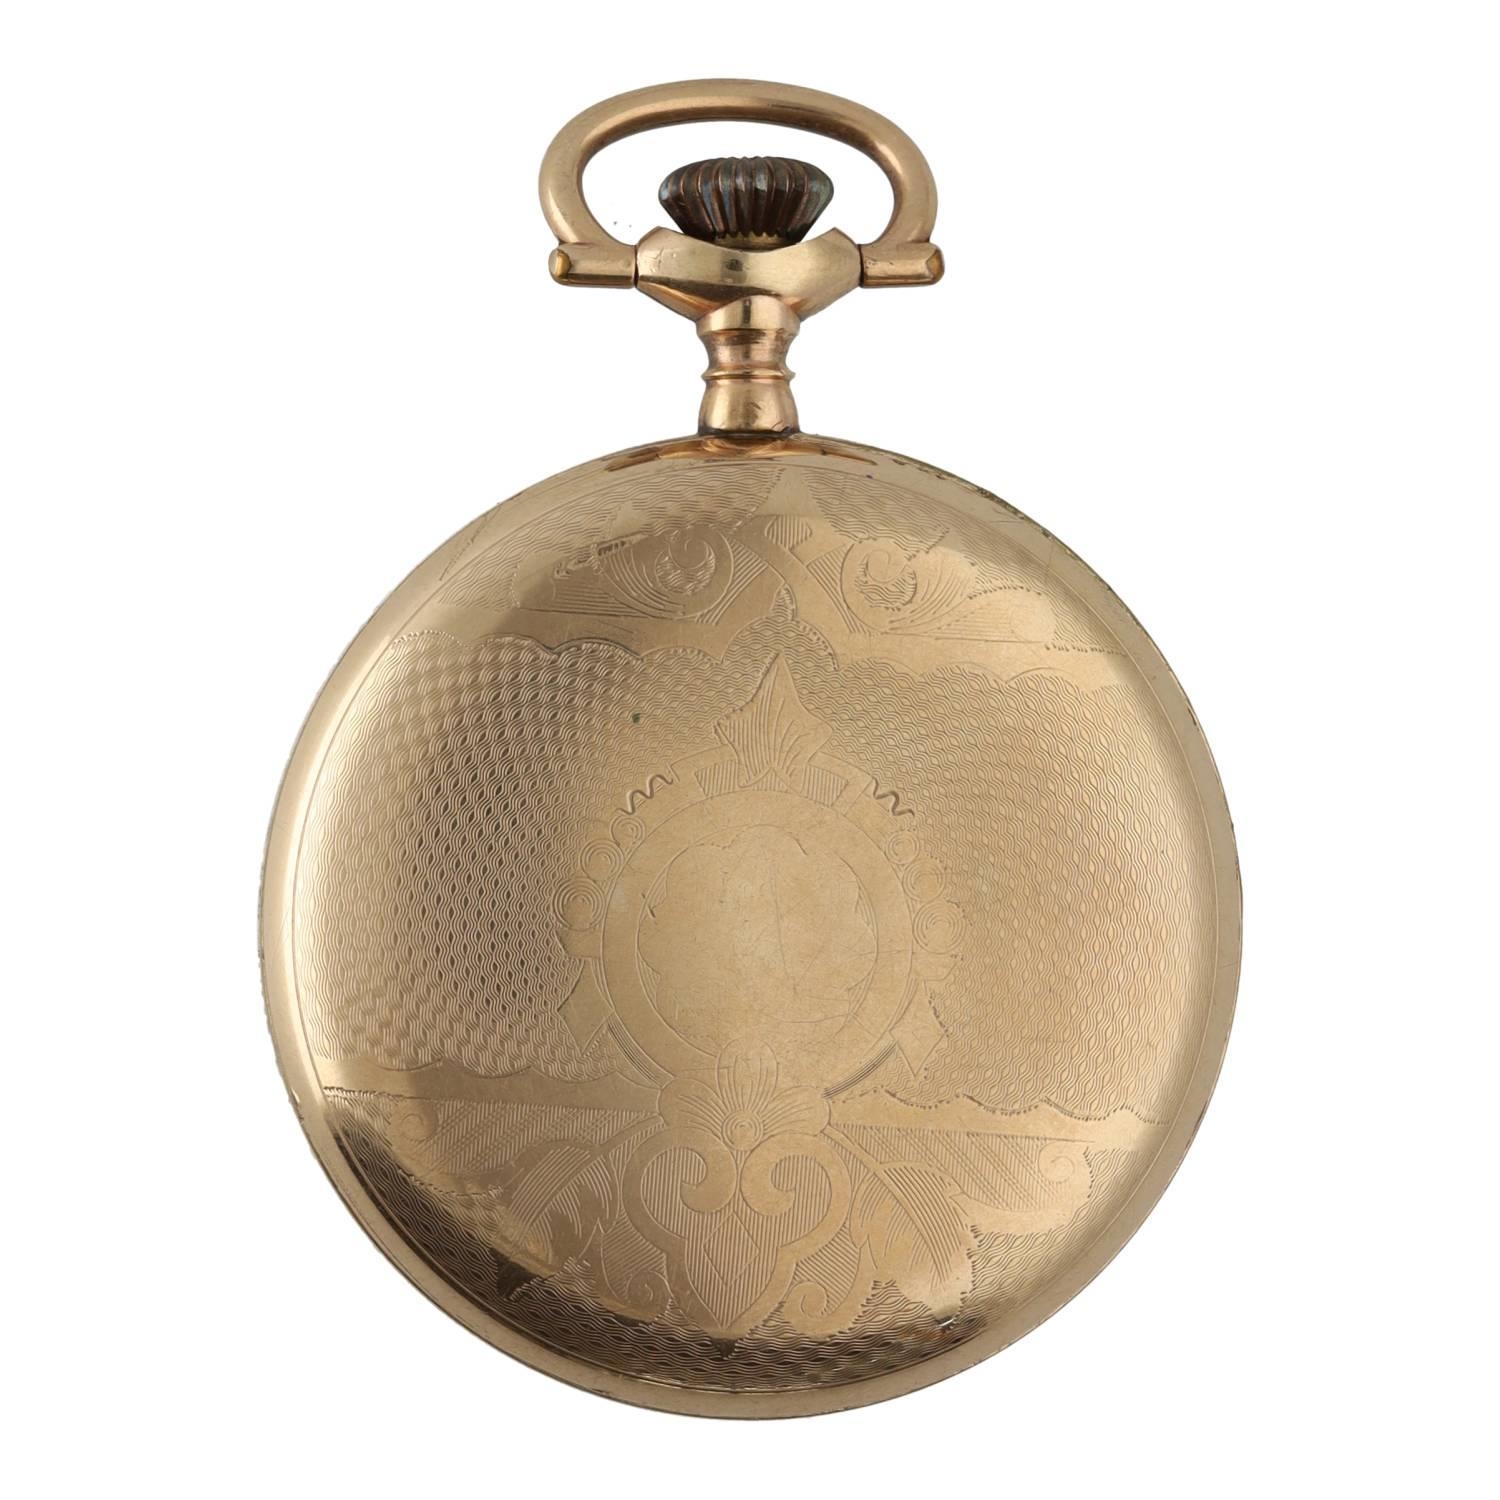 American Waltham 'Traveler' gold plated lever pocket watch, circa 1902, serial no. 11399670, - Image 4 of 4